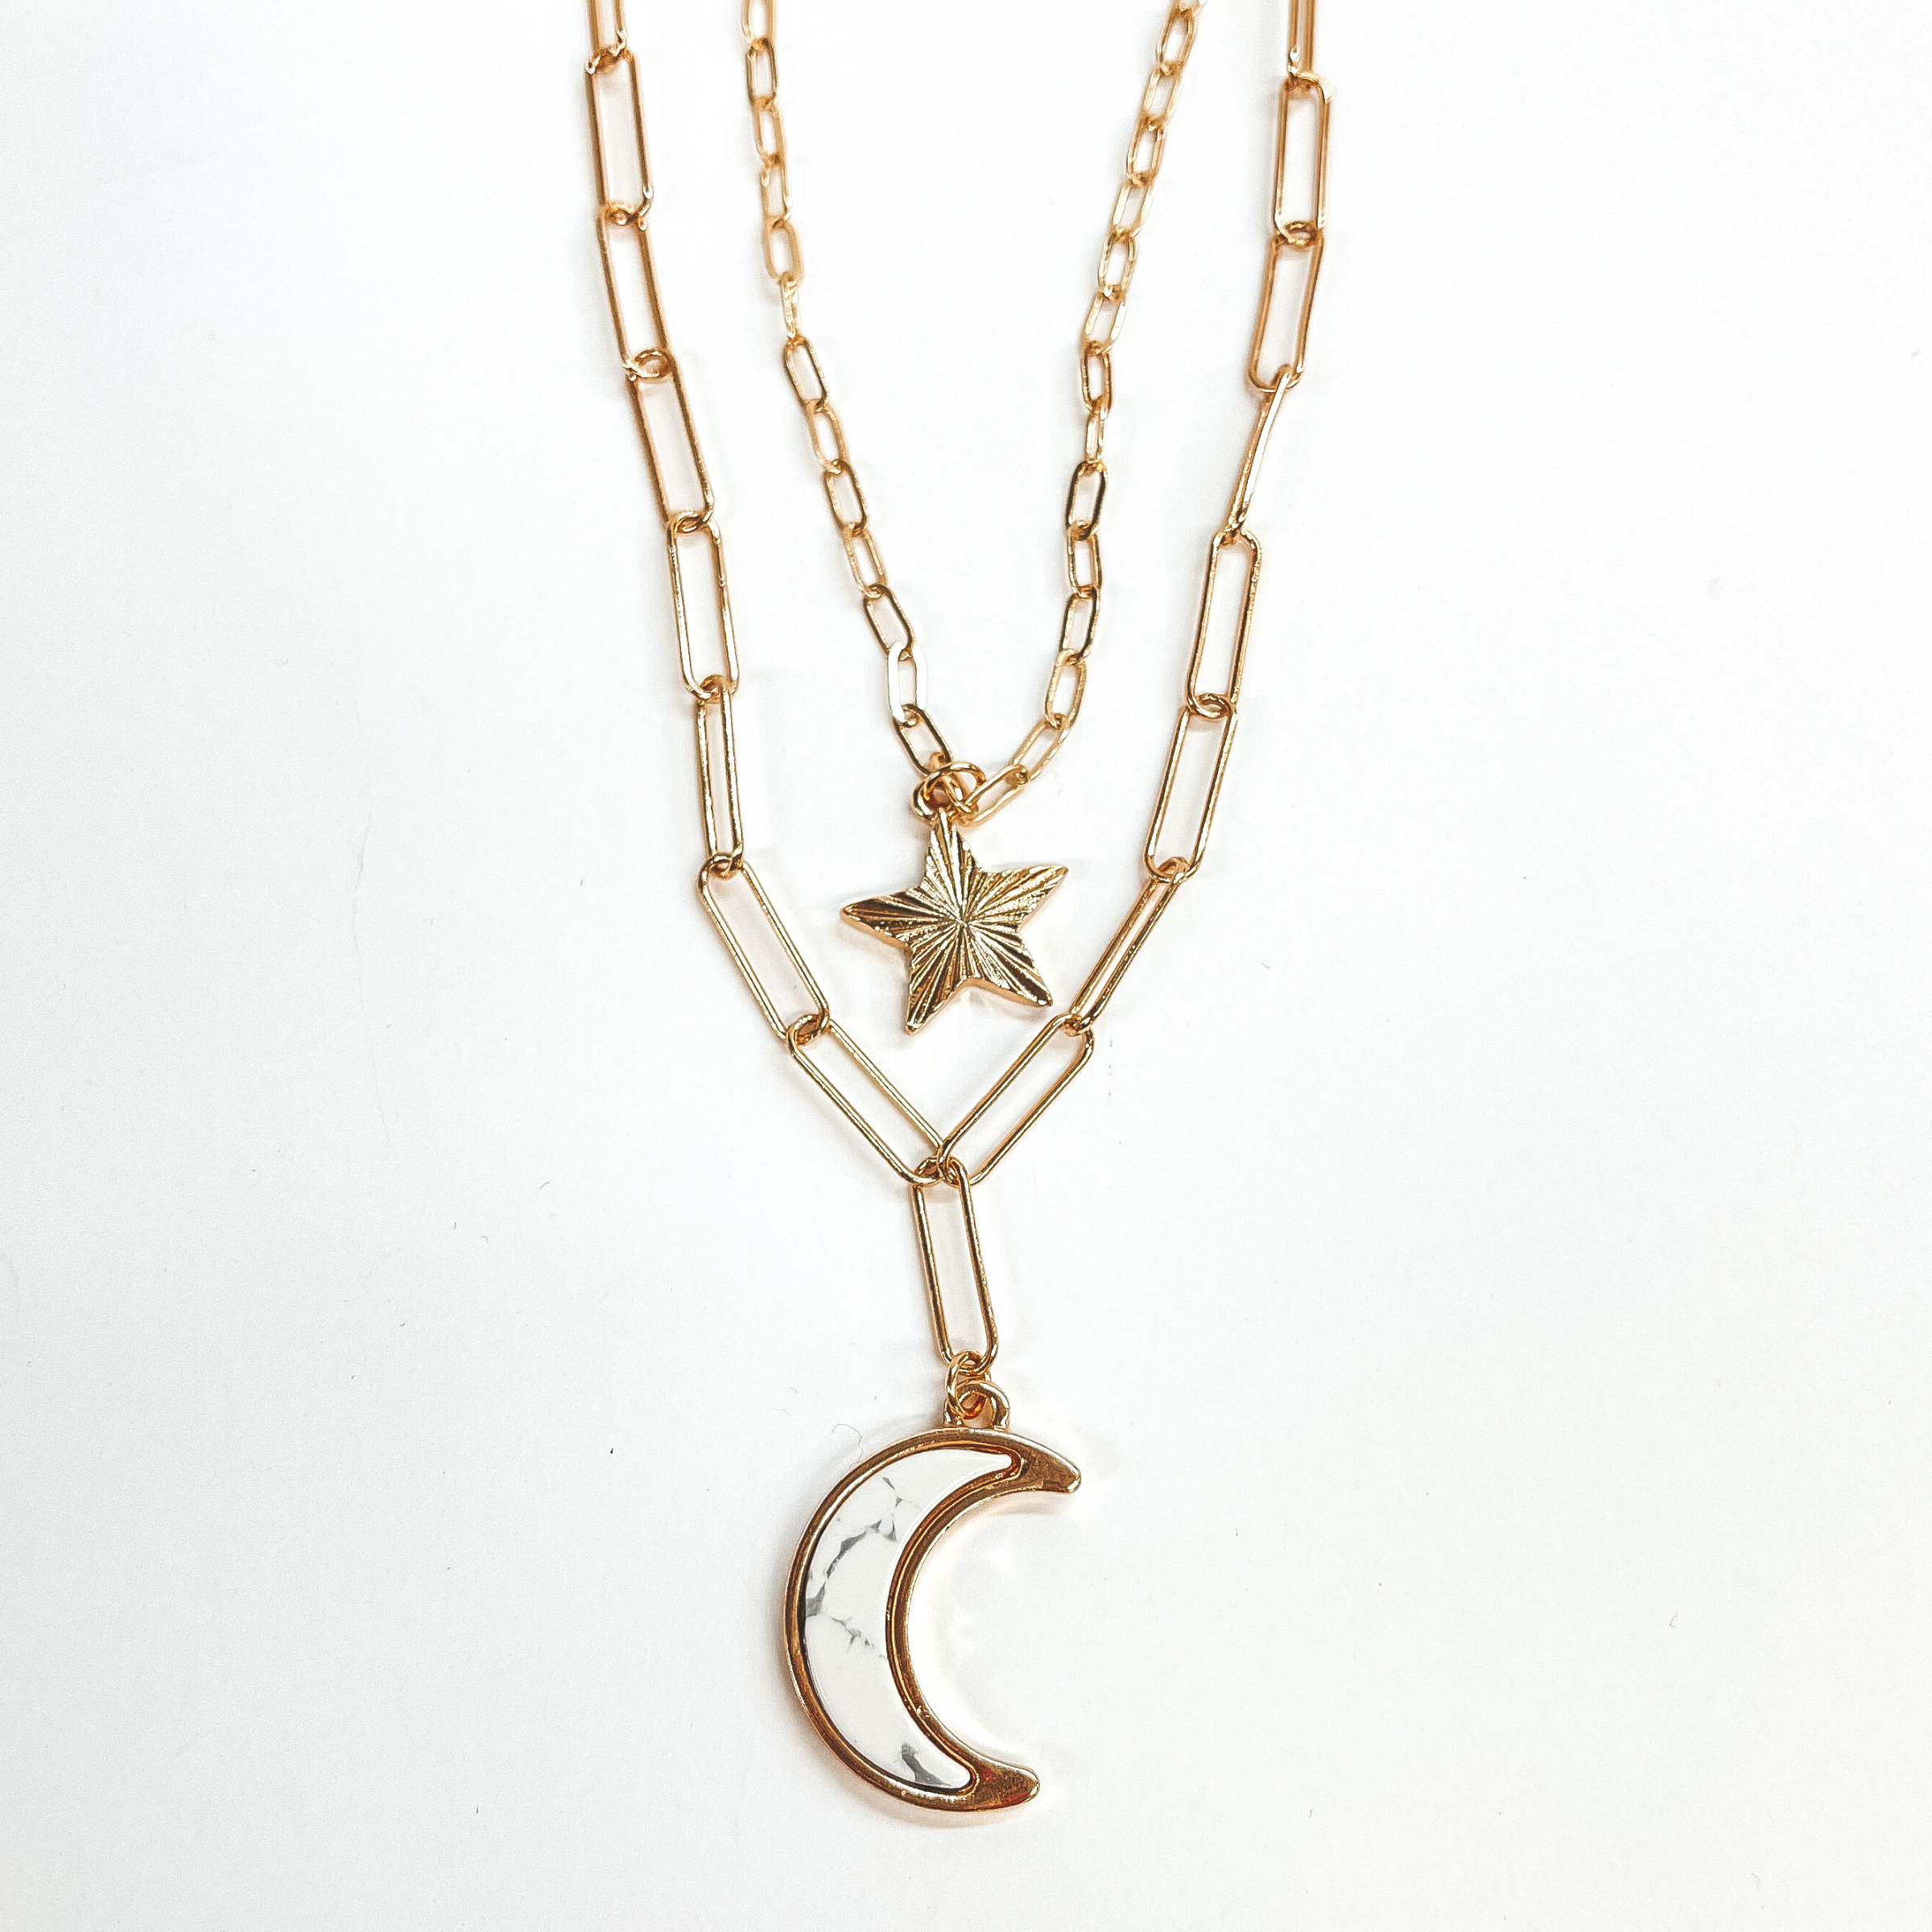 Double layered paperclip chain necklace in gold.  The shorter strand has a gold sunburst star and  the longer strand has a white stone pendant in a moon shape. This necklace is taken on a white background.